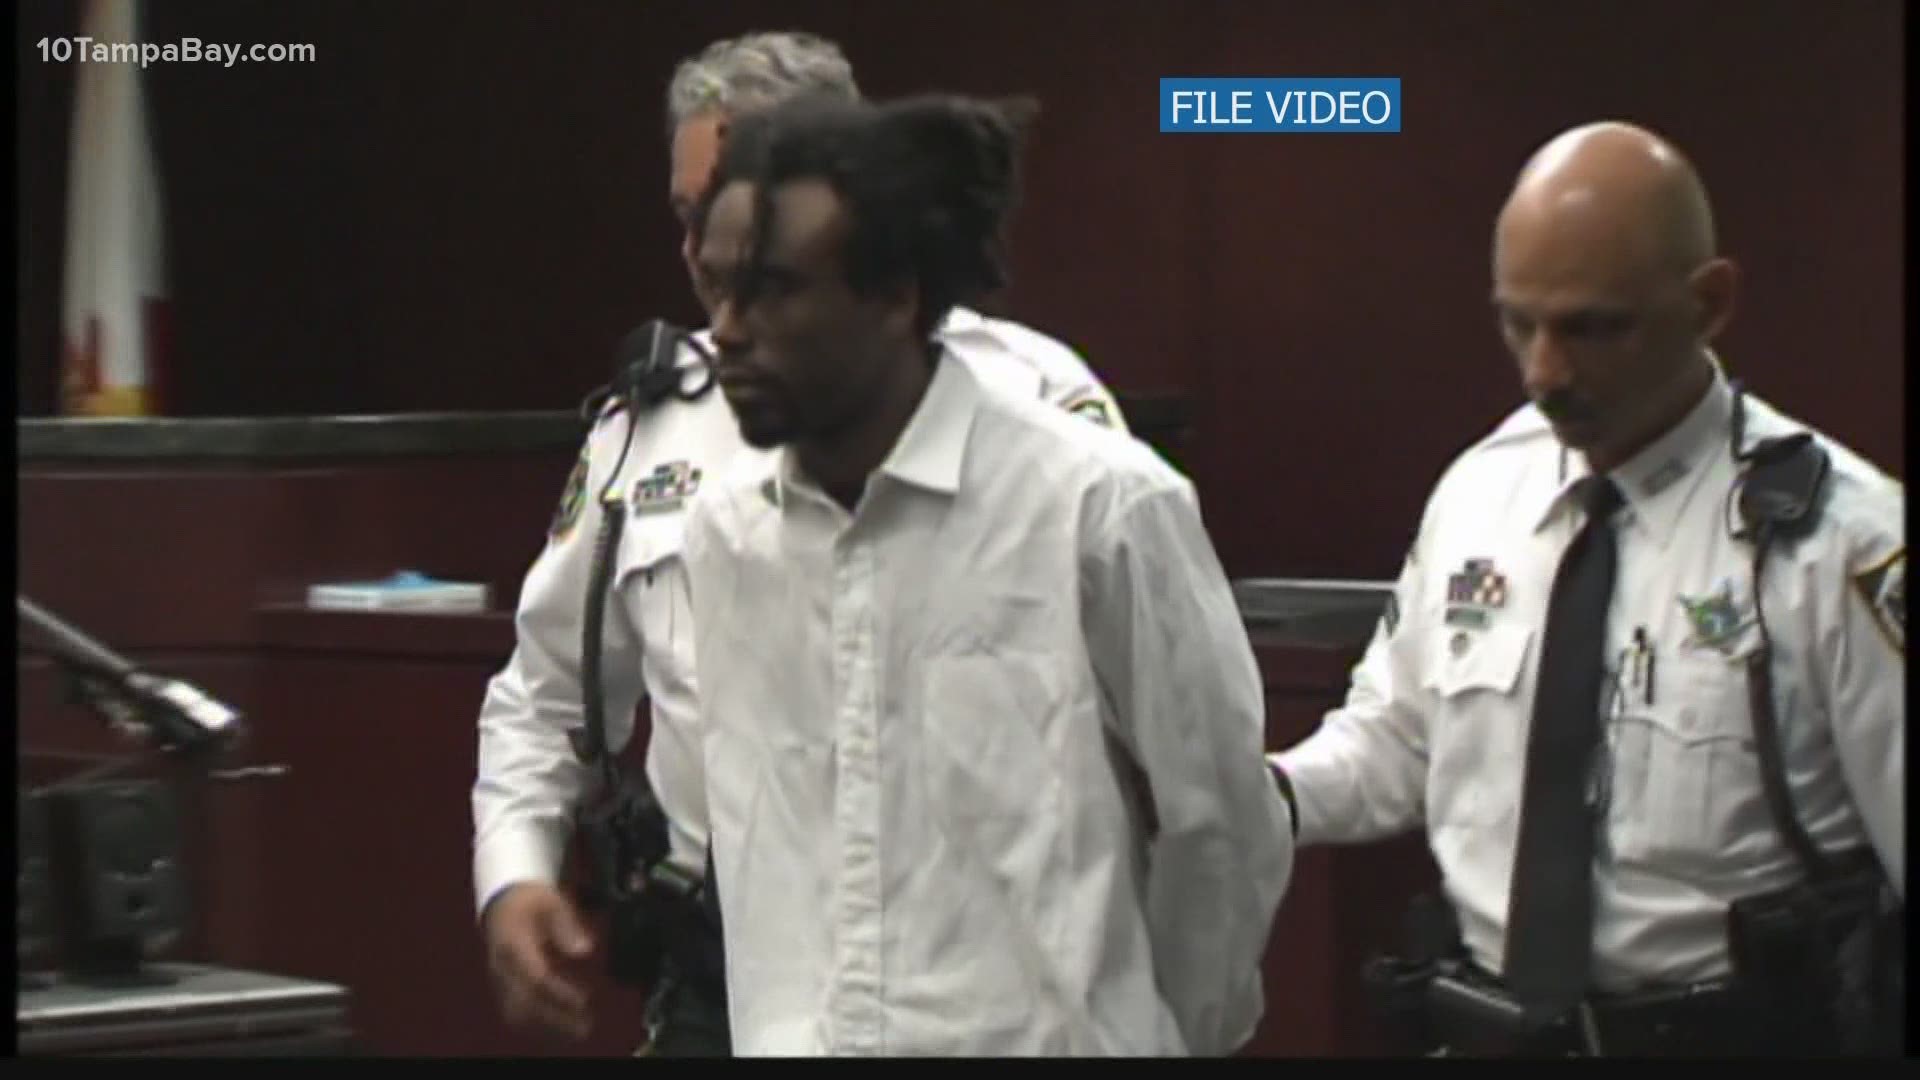 Morris is currently on death row for killing two Tampa police officers in 2010.